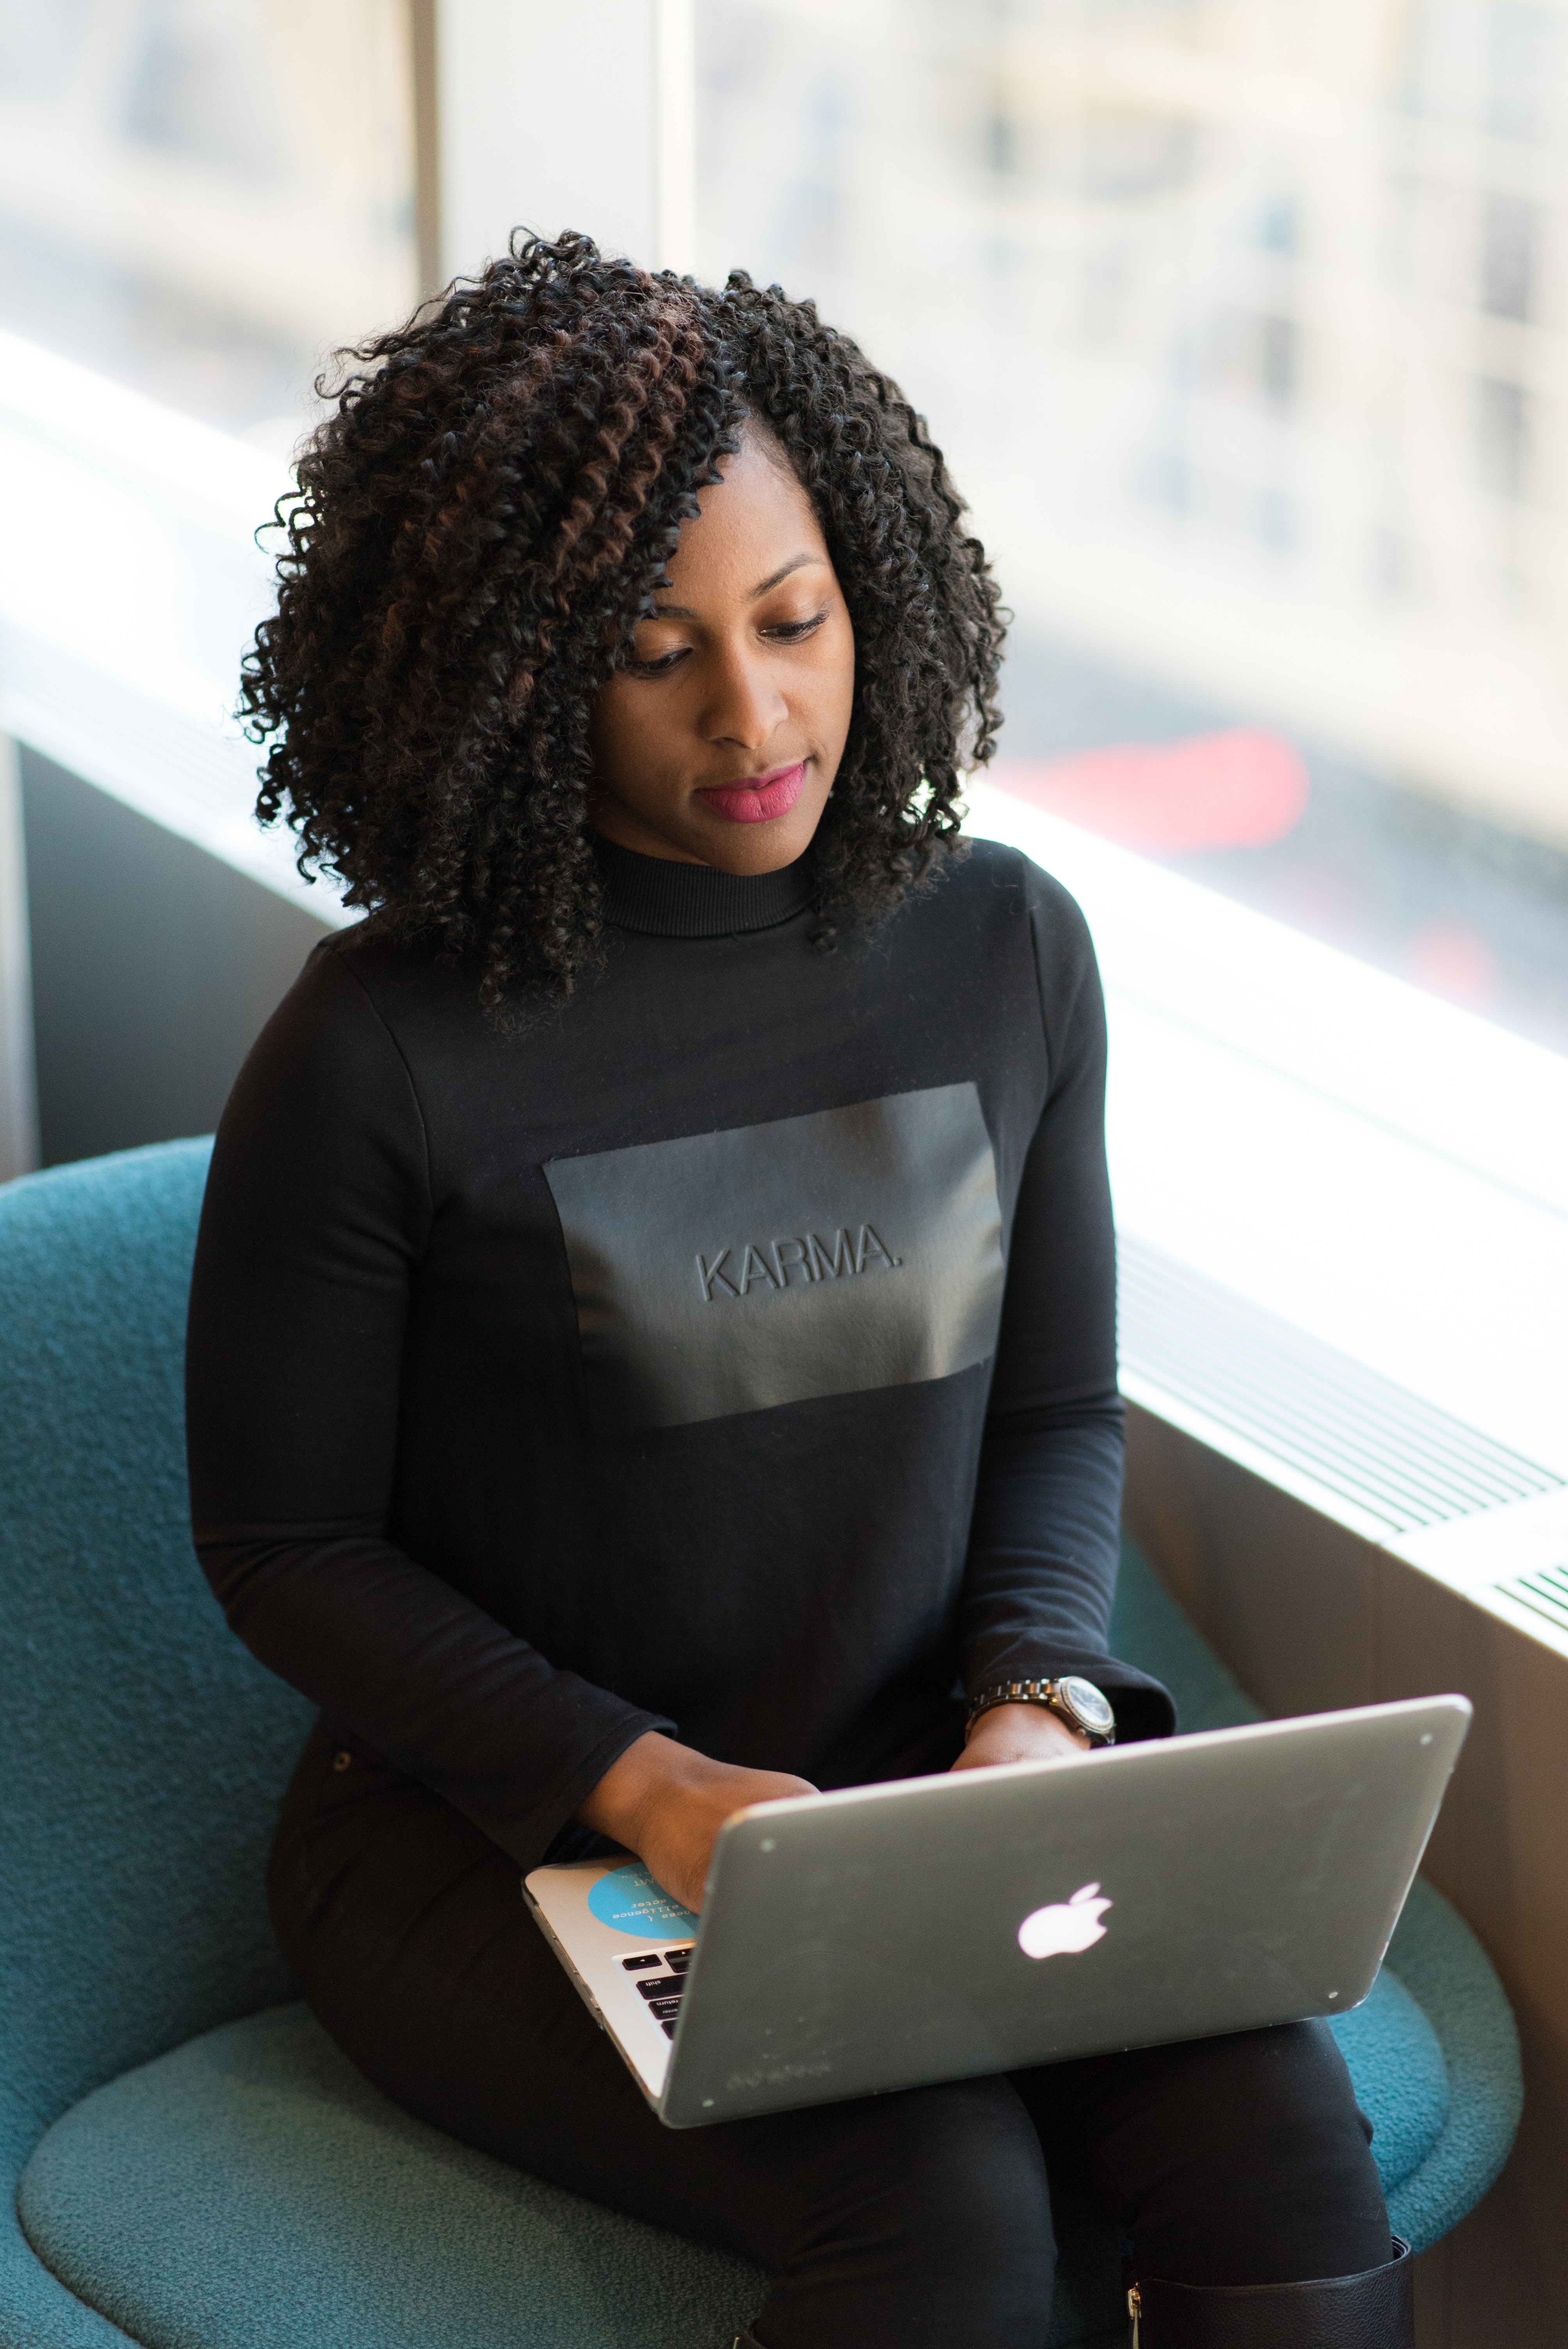 A woman in a black long-sleeved shirt using MacBook